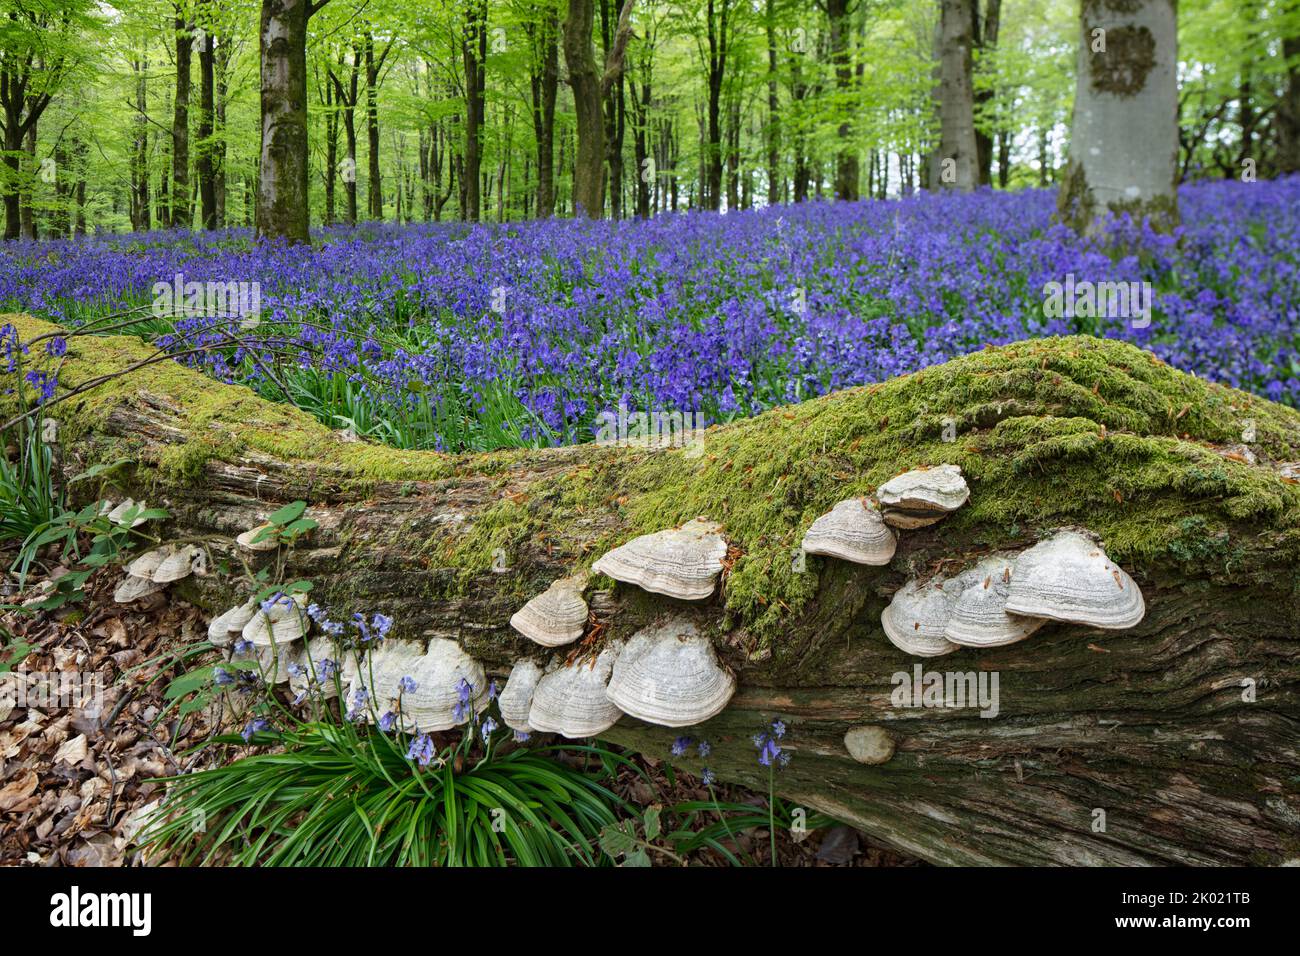 Funghi growing on fallen and rotting tree stump in bluebell wood, Berkshire, England, United Kingdom, Europe Stock Photo